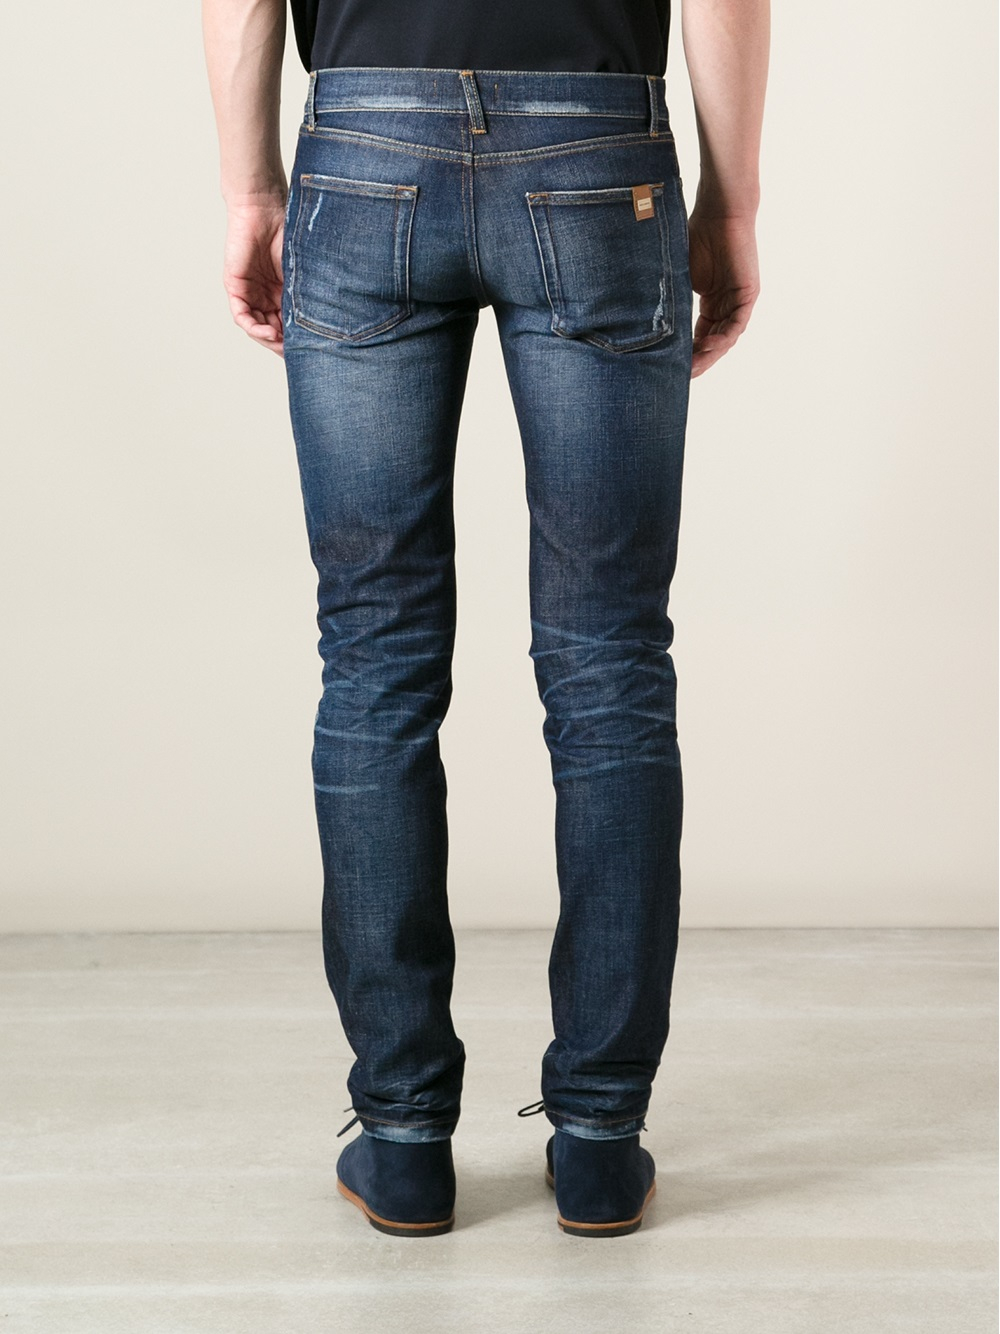 Lyst - Dolce & Gabbana Medium Washed Jeans in Blue for Men